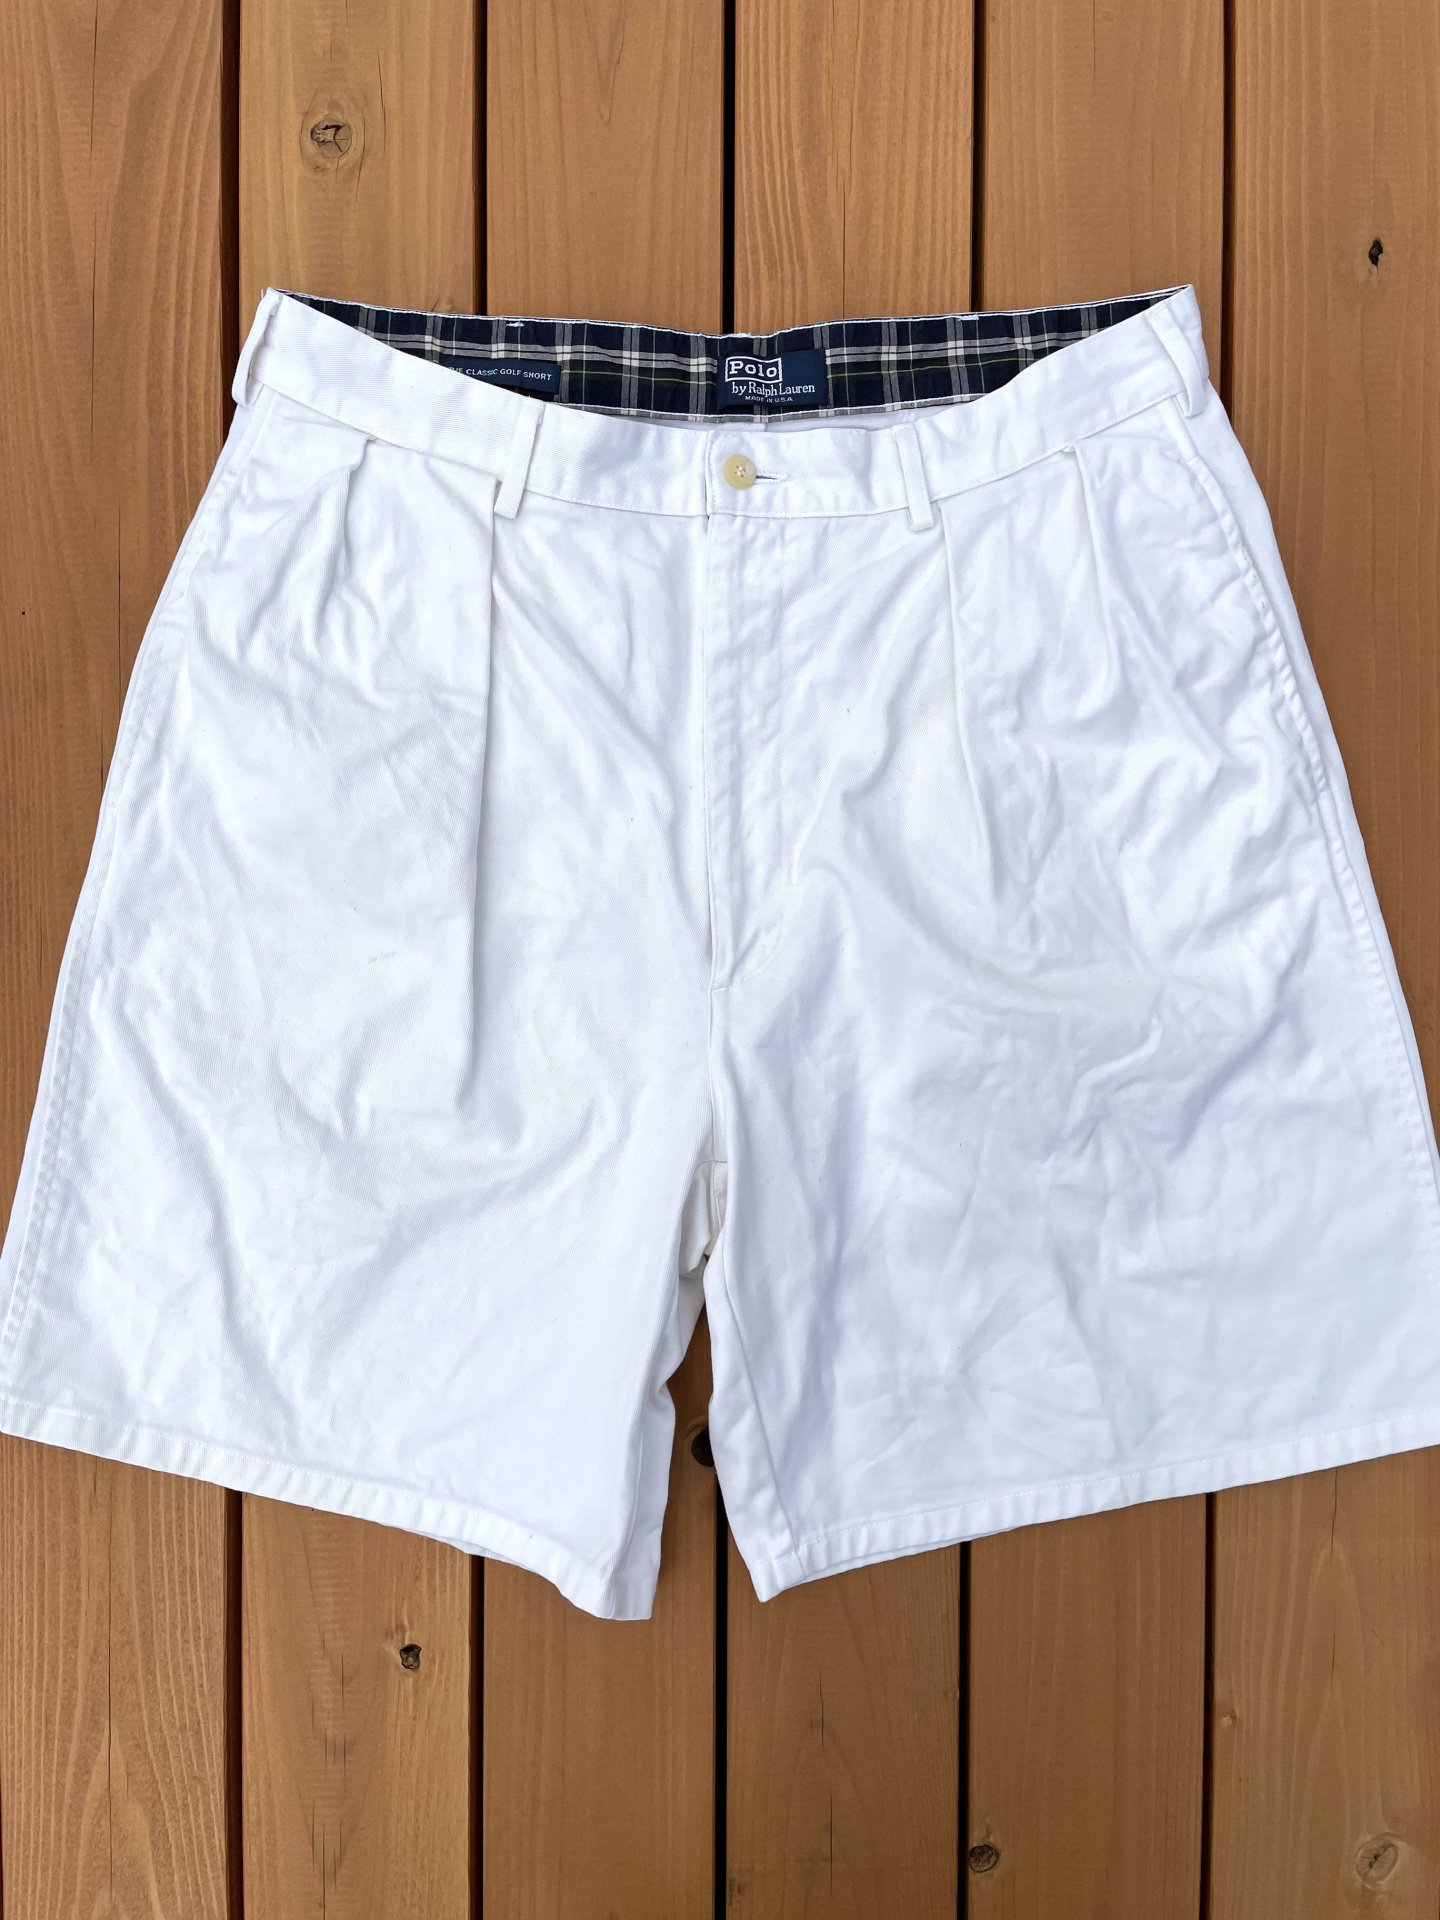 VINTAGE "Polo by Ralph Lauren" CHINO SHORTs WHITE MADE in USA - container